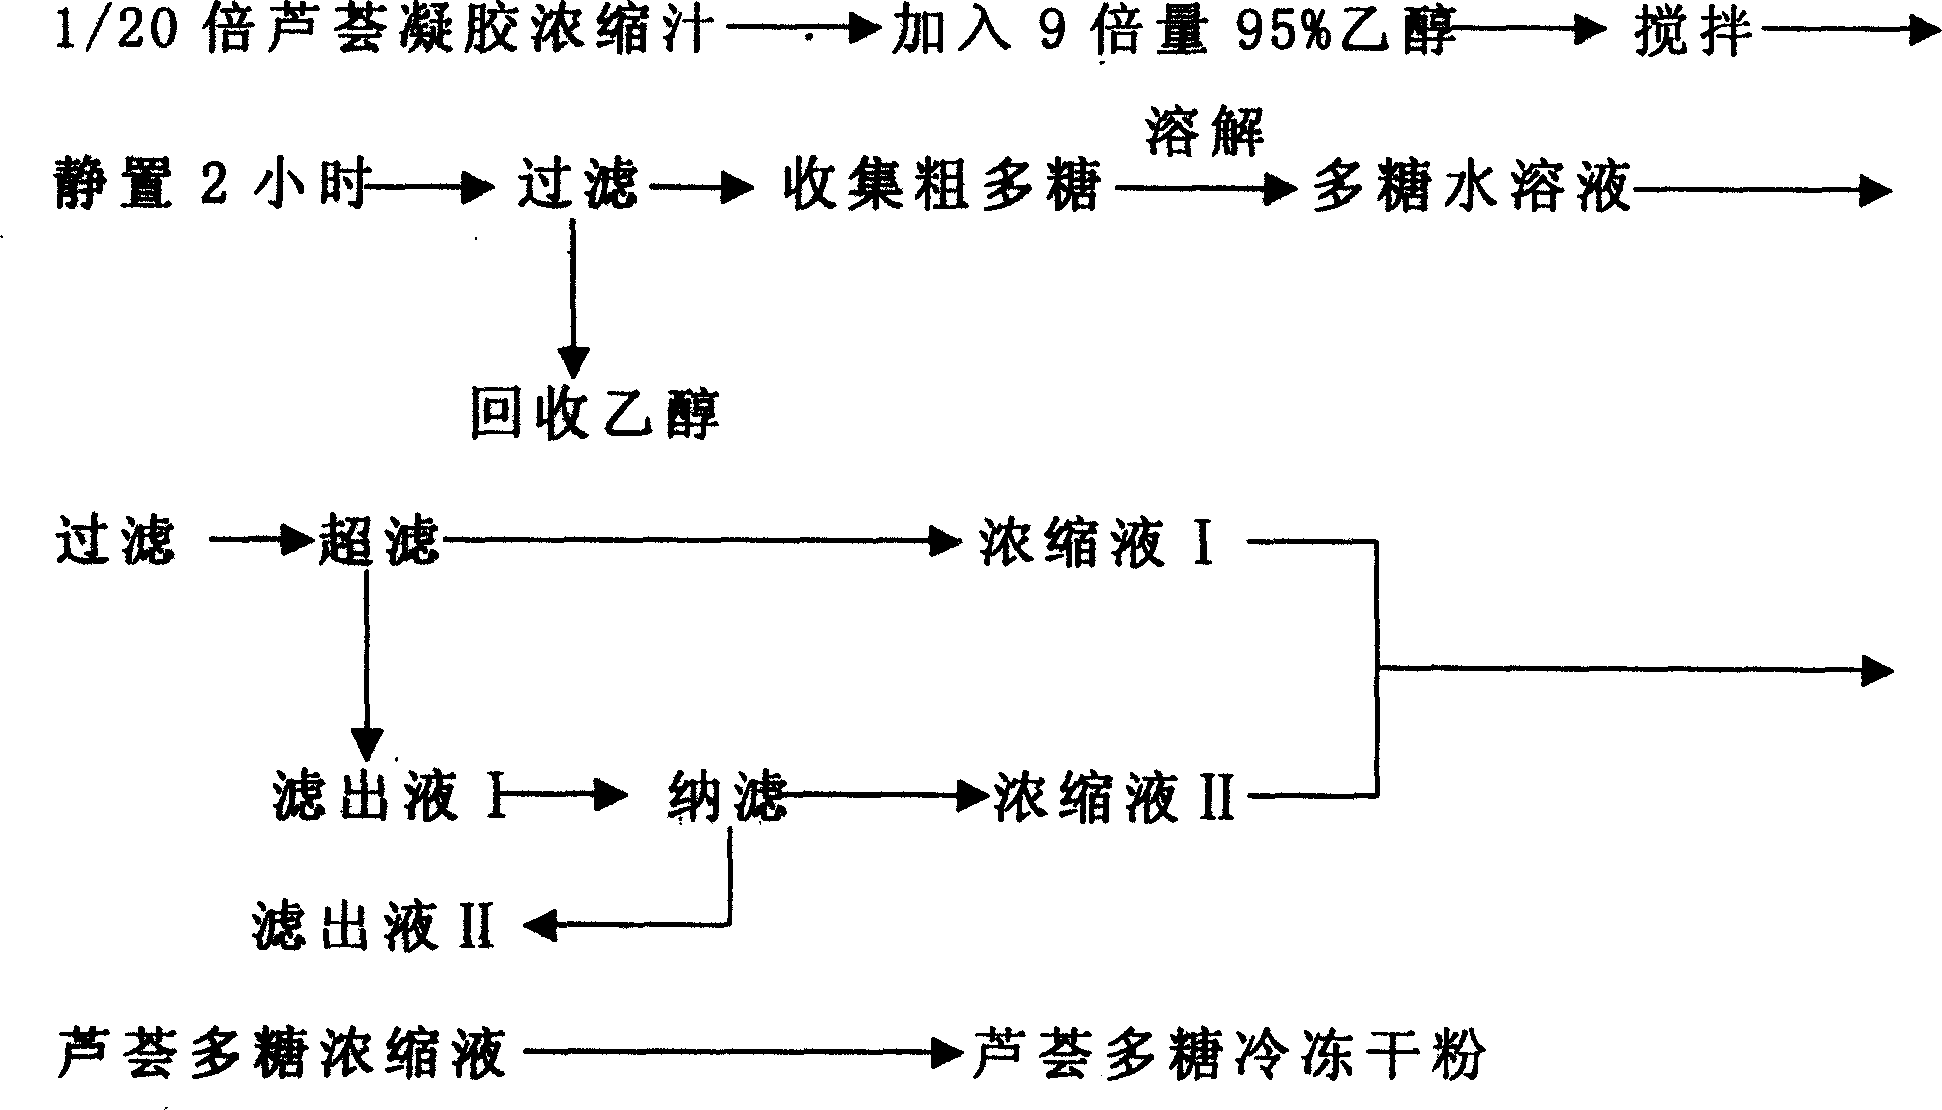 Process for extracting aloinose